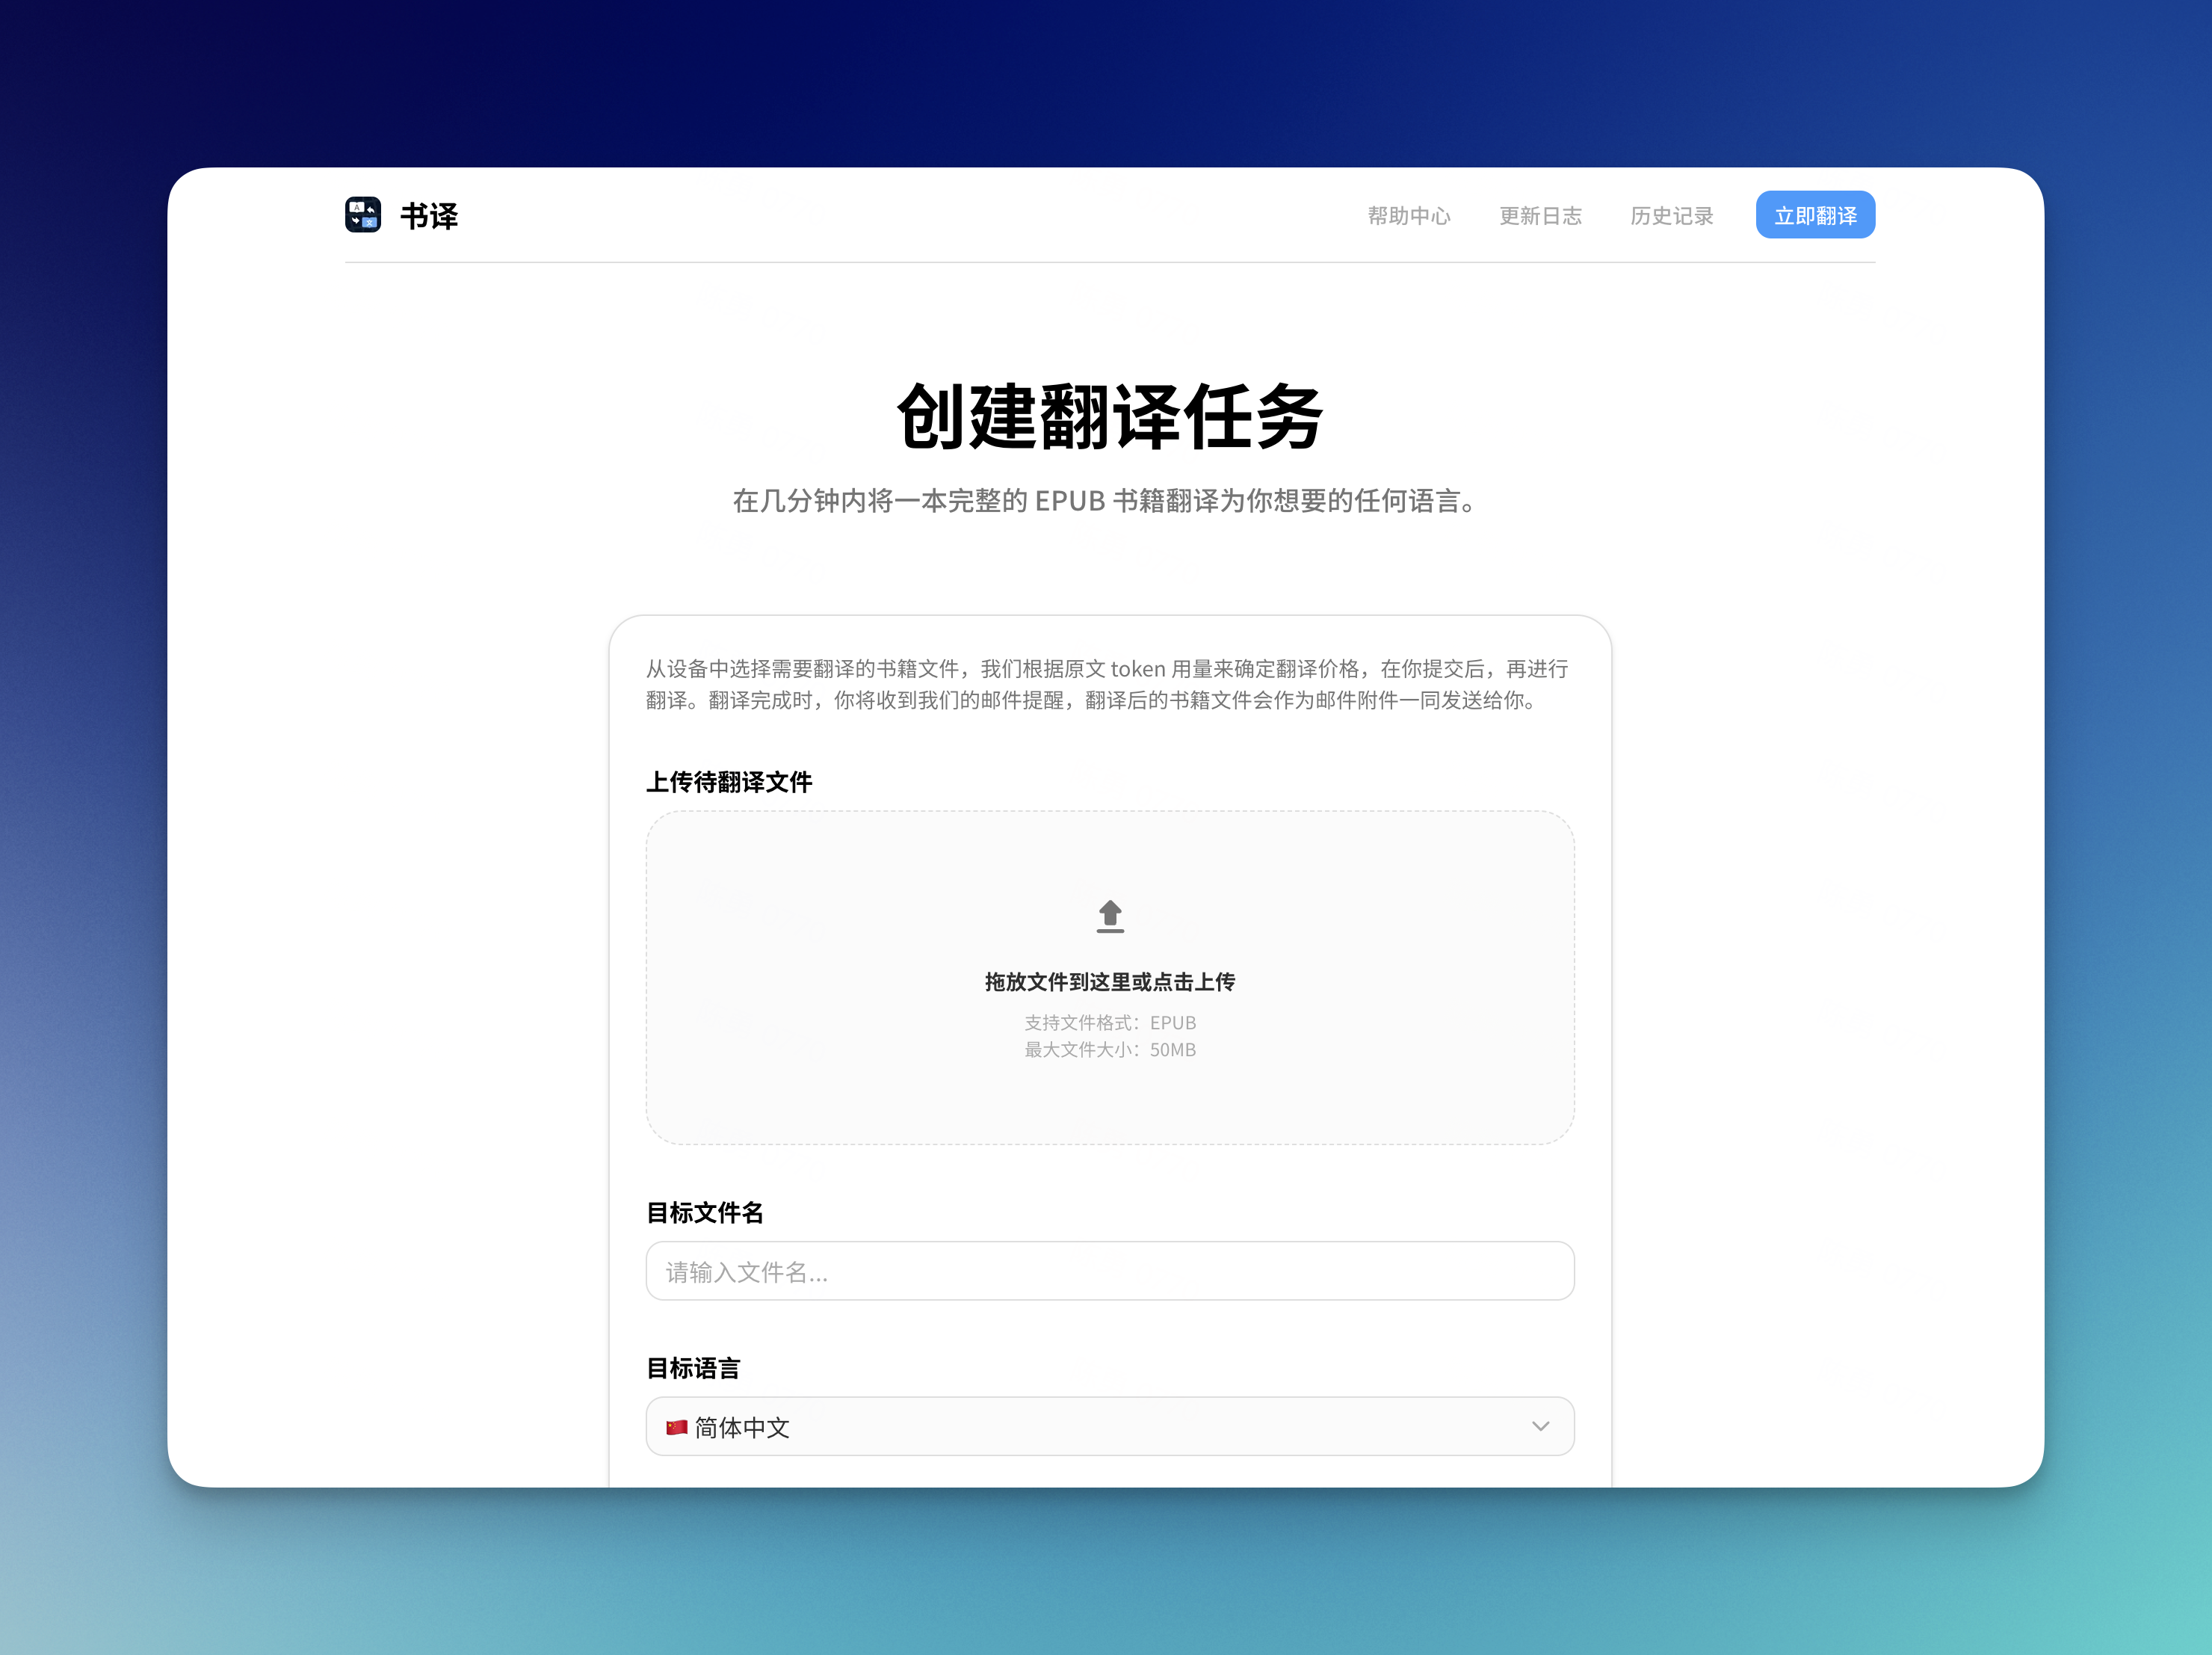 Web App Officially Released